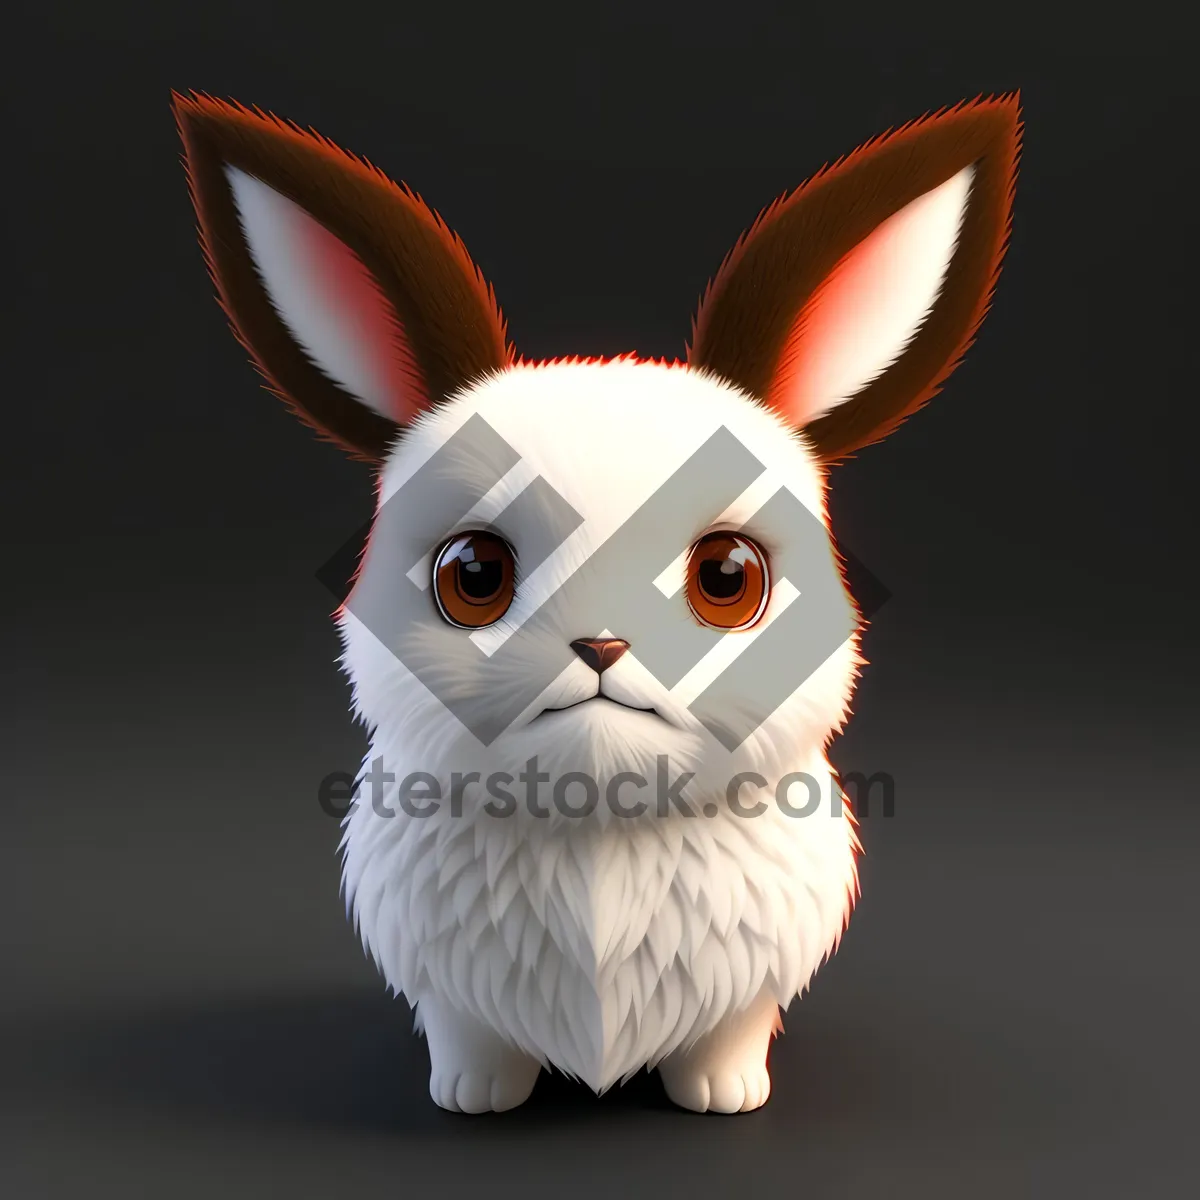 Picture of Fluffy Bunny with Cute Ears - Adorable Pet Portrait